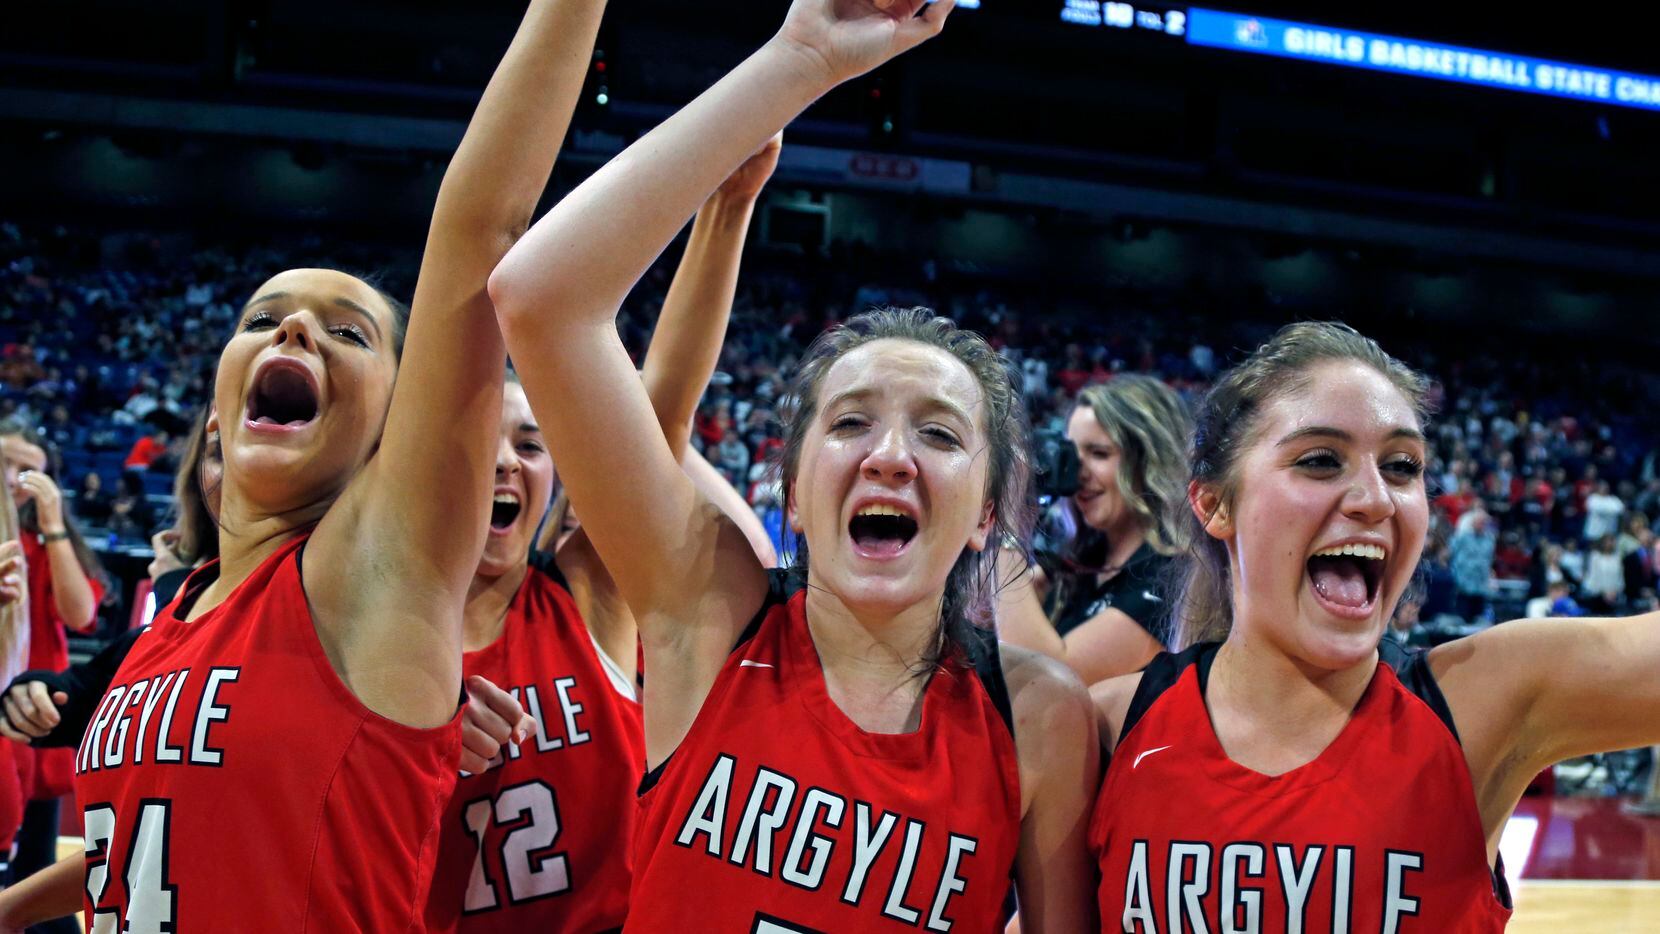 UIL girls basketball 4A State final between Argyle and Hardin-Jefferson on ...